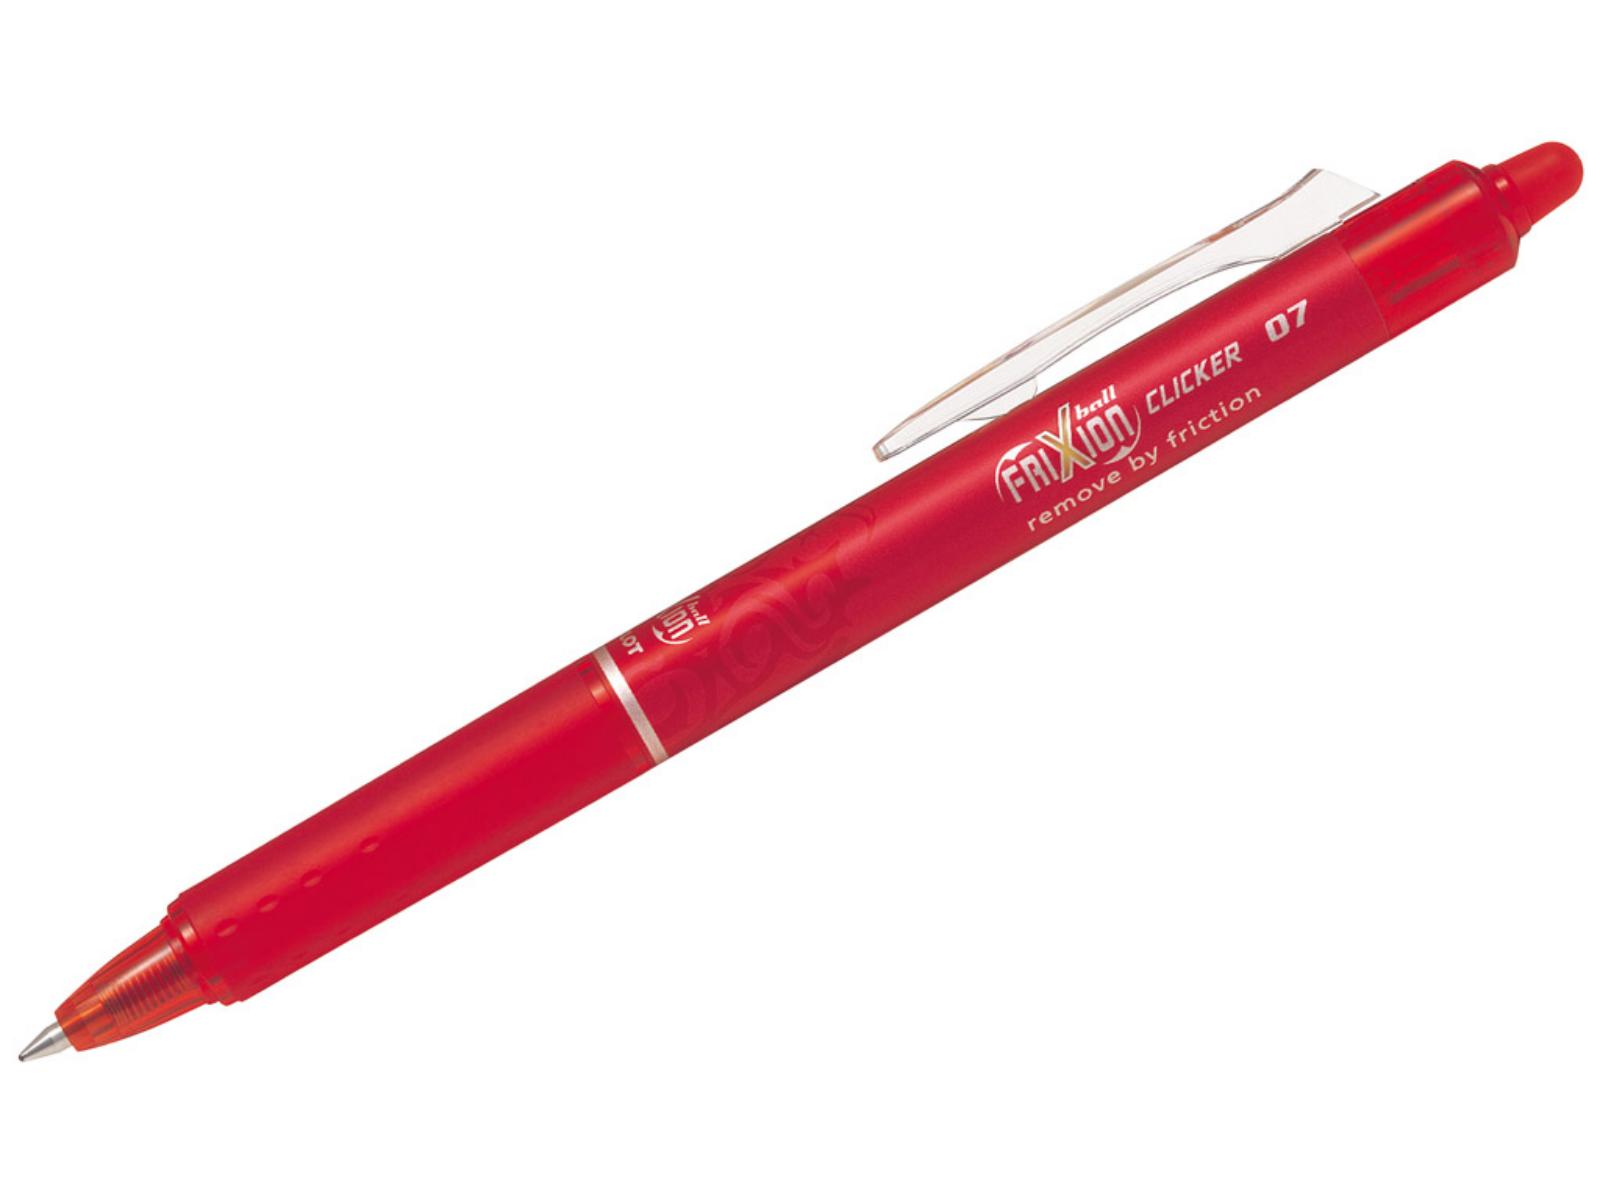 Stylo frixion clicker 0.7 rouge